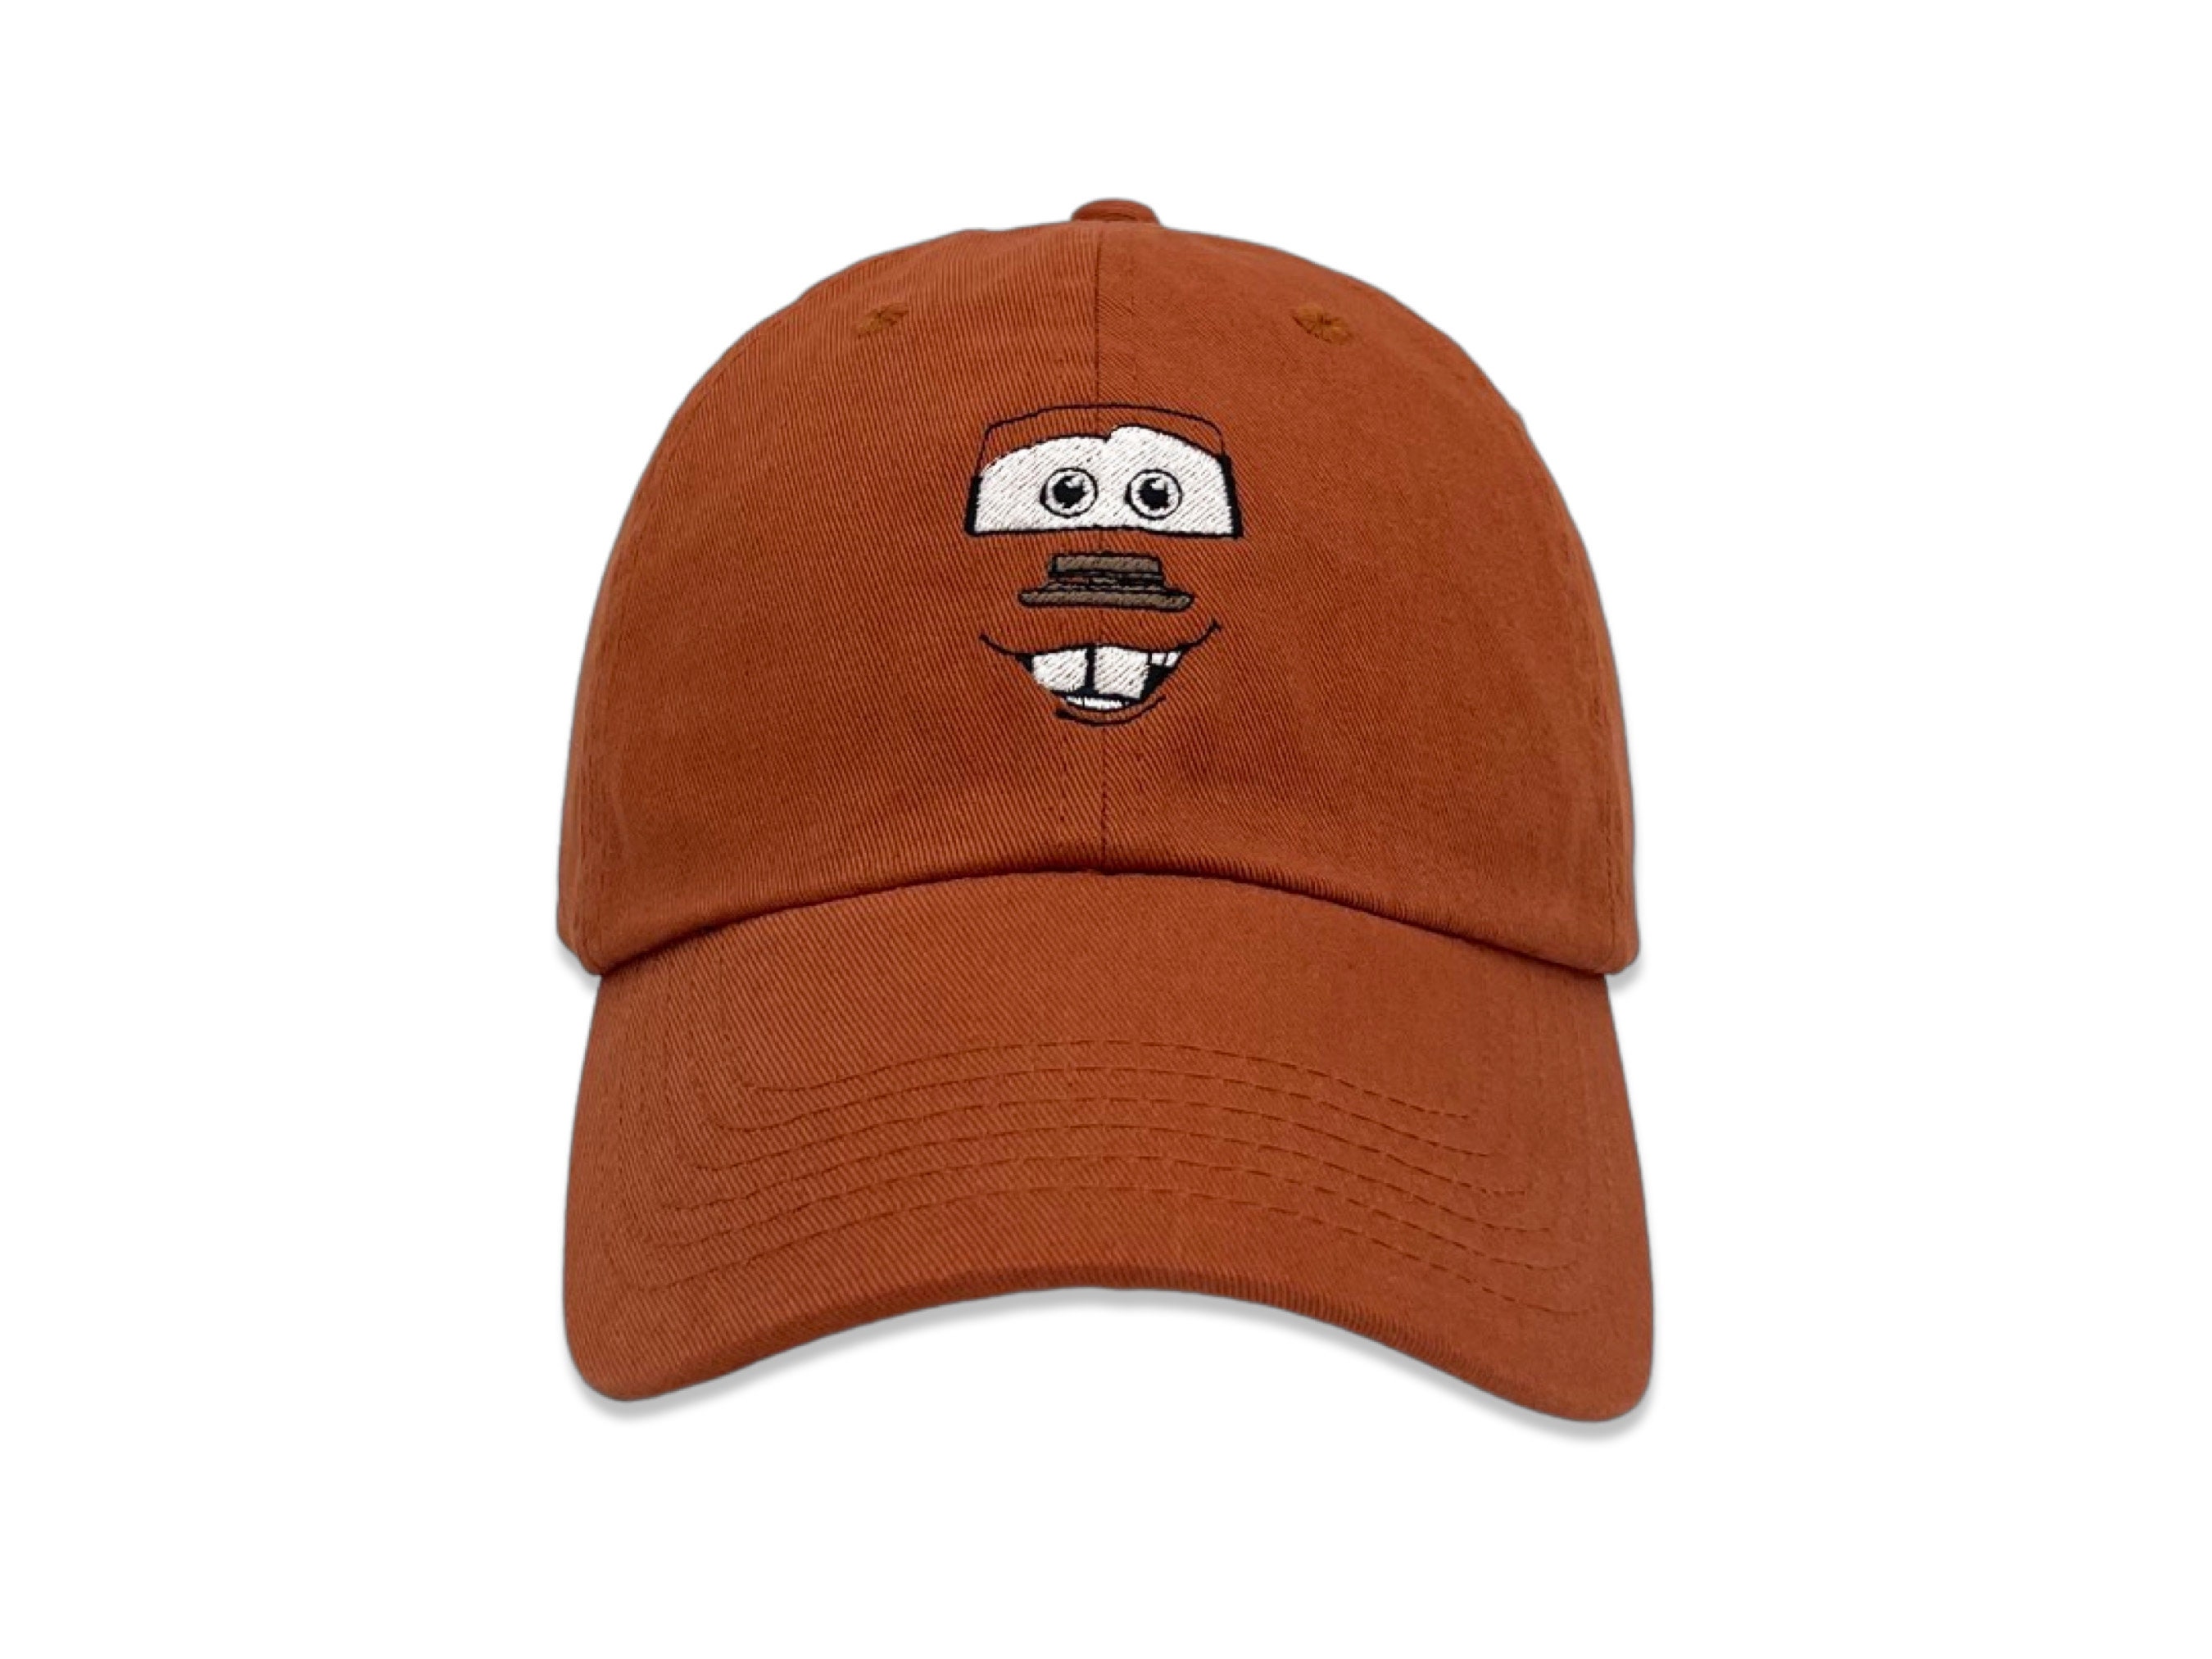 Cars Tow Mater Face Embroidered Cap Texas Orange Hat Professionally  Embroidered Adult Unisex Adjustable Dad Cap Mcqueen Sally Mack 